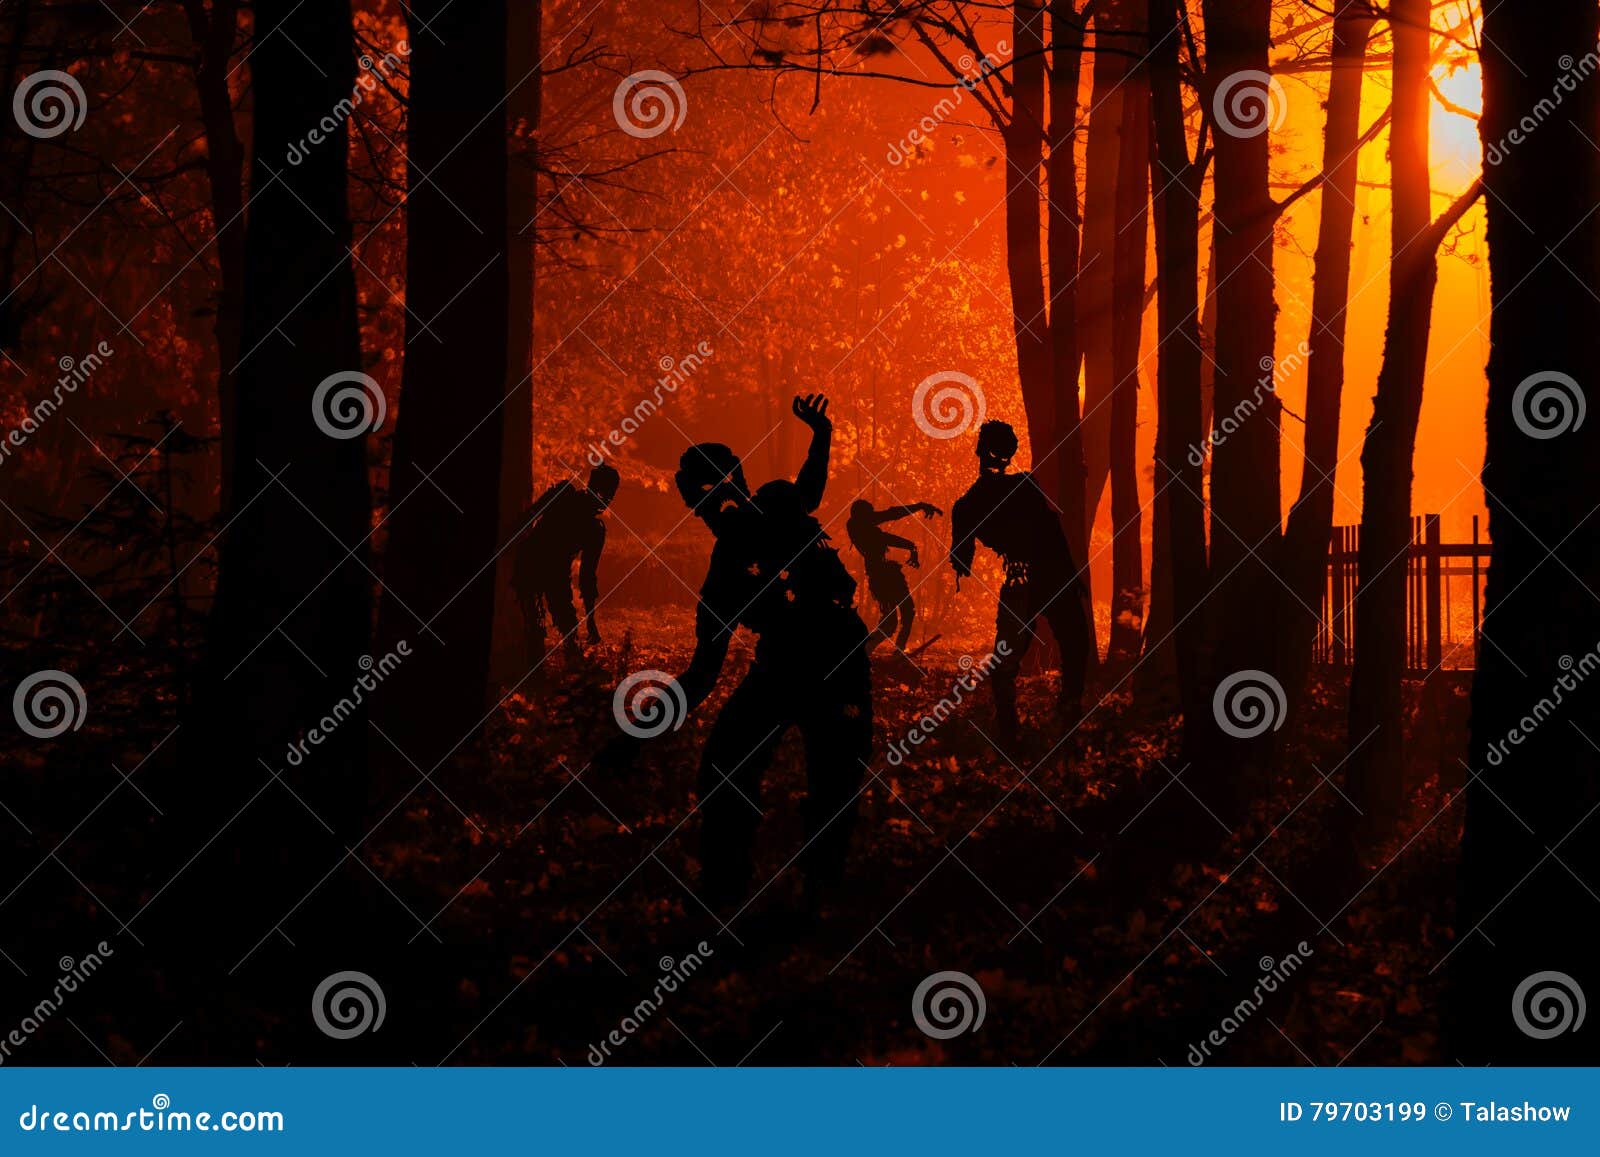 Crowd Of Hungry Zombies In The Woods Stock Image - Image of crowd